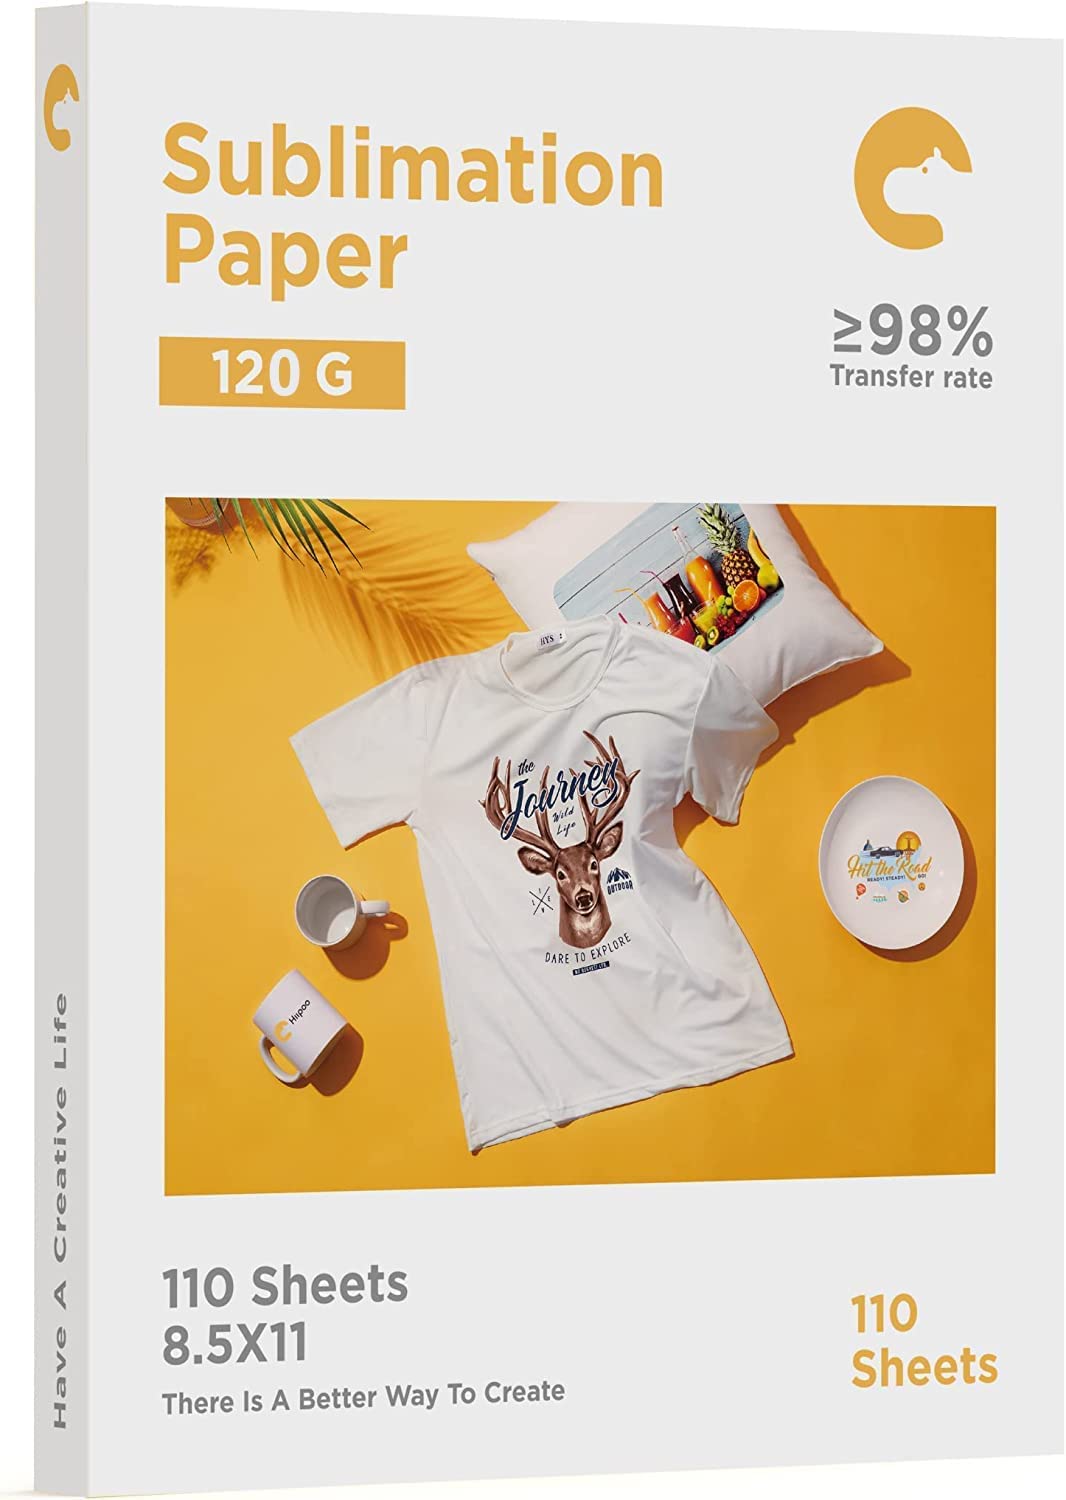 hiipoo sublimation paper